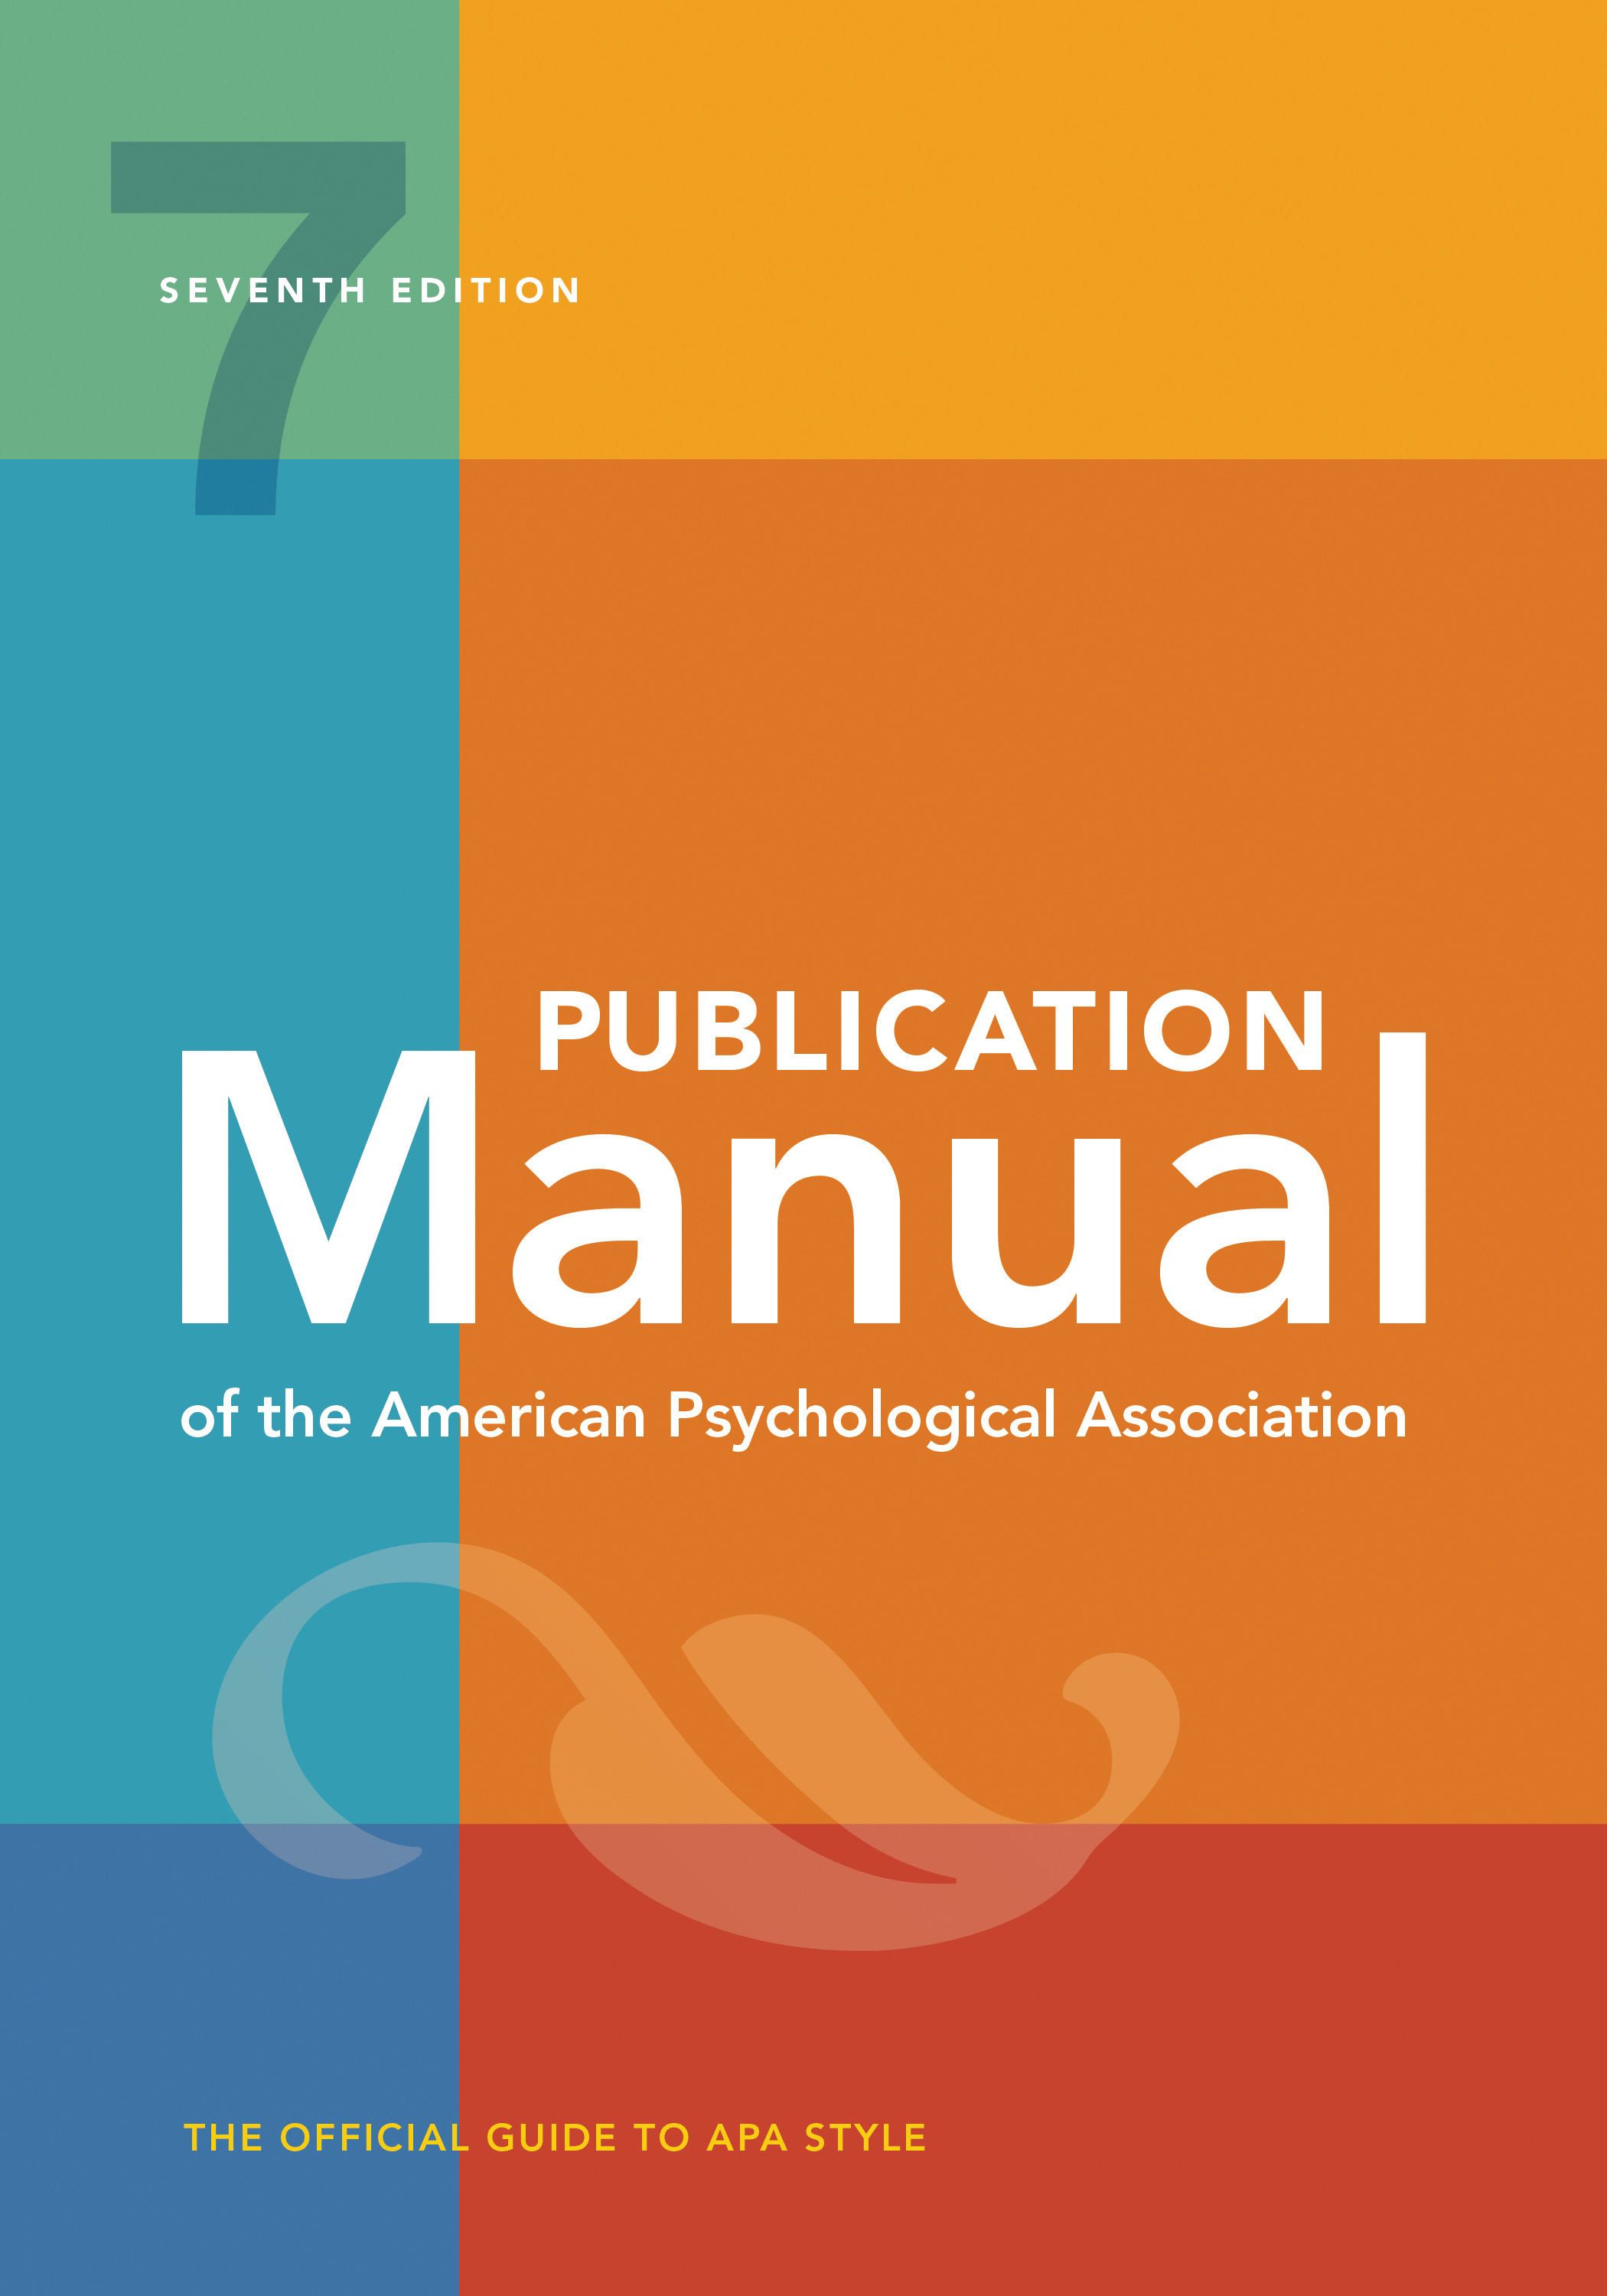 Publication Manual (OFFICIAL) 7th Edition of the American Psychological Association | 